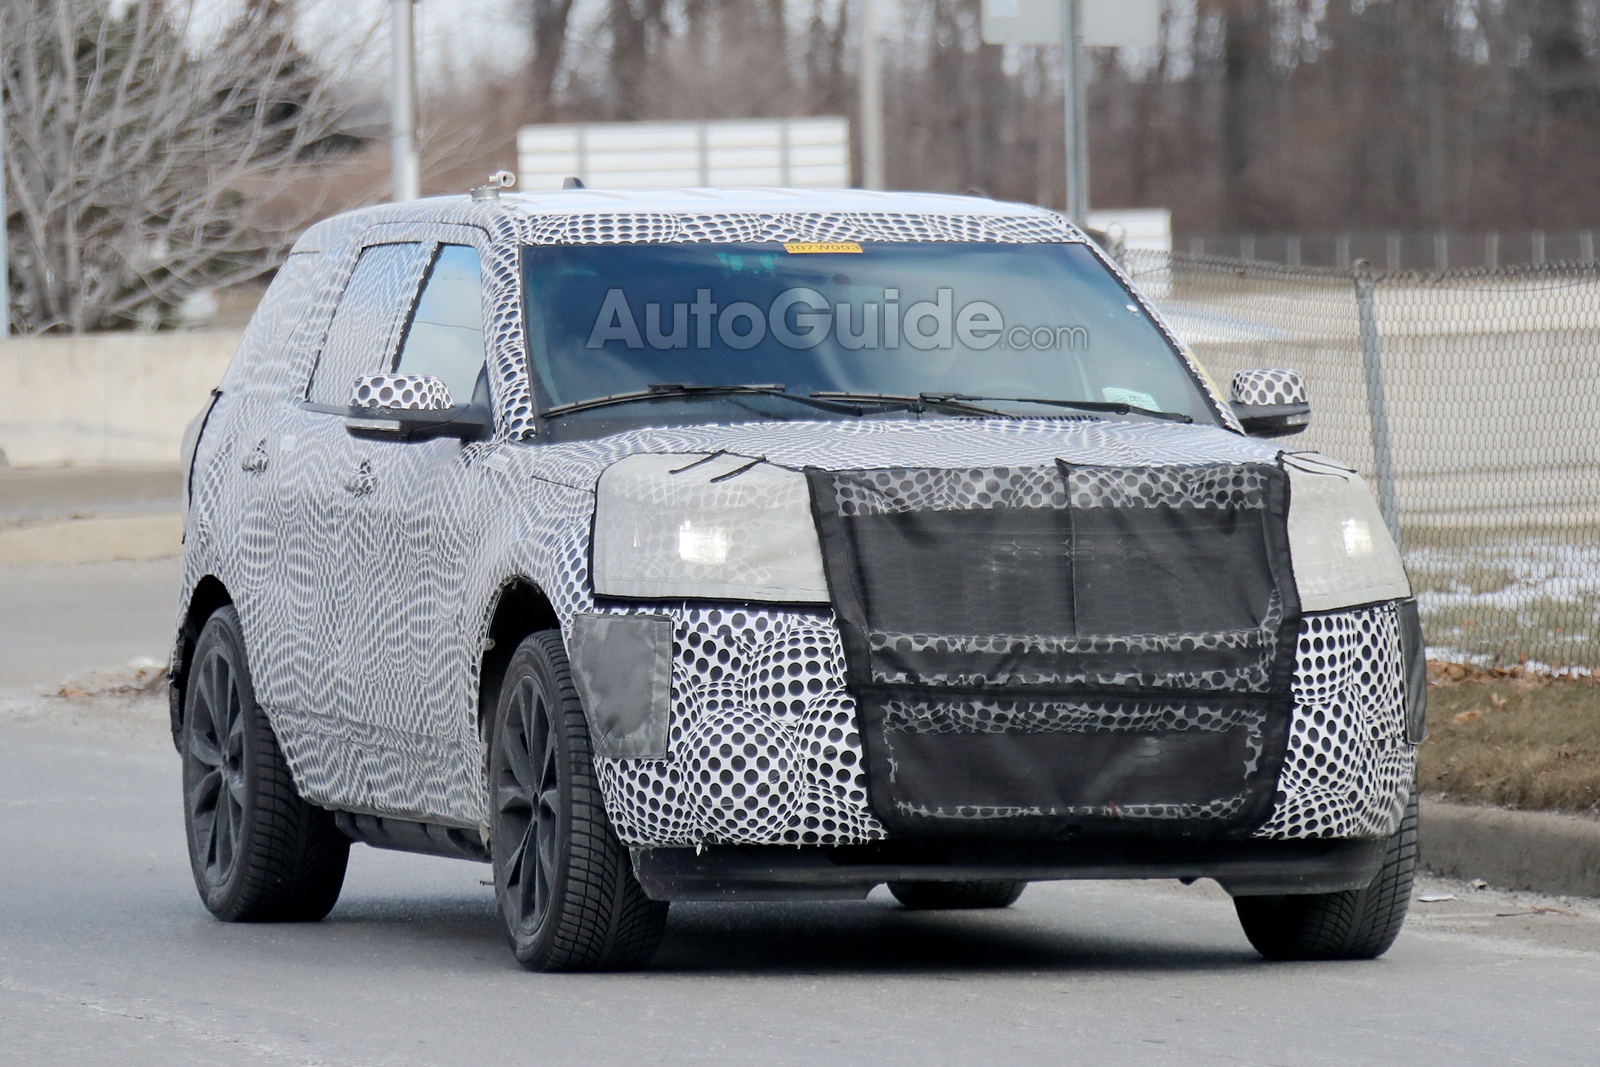 S650 Mustang S650 is out there somewhere, isn't she? Ford-Explorer-ST-Spied-1